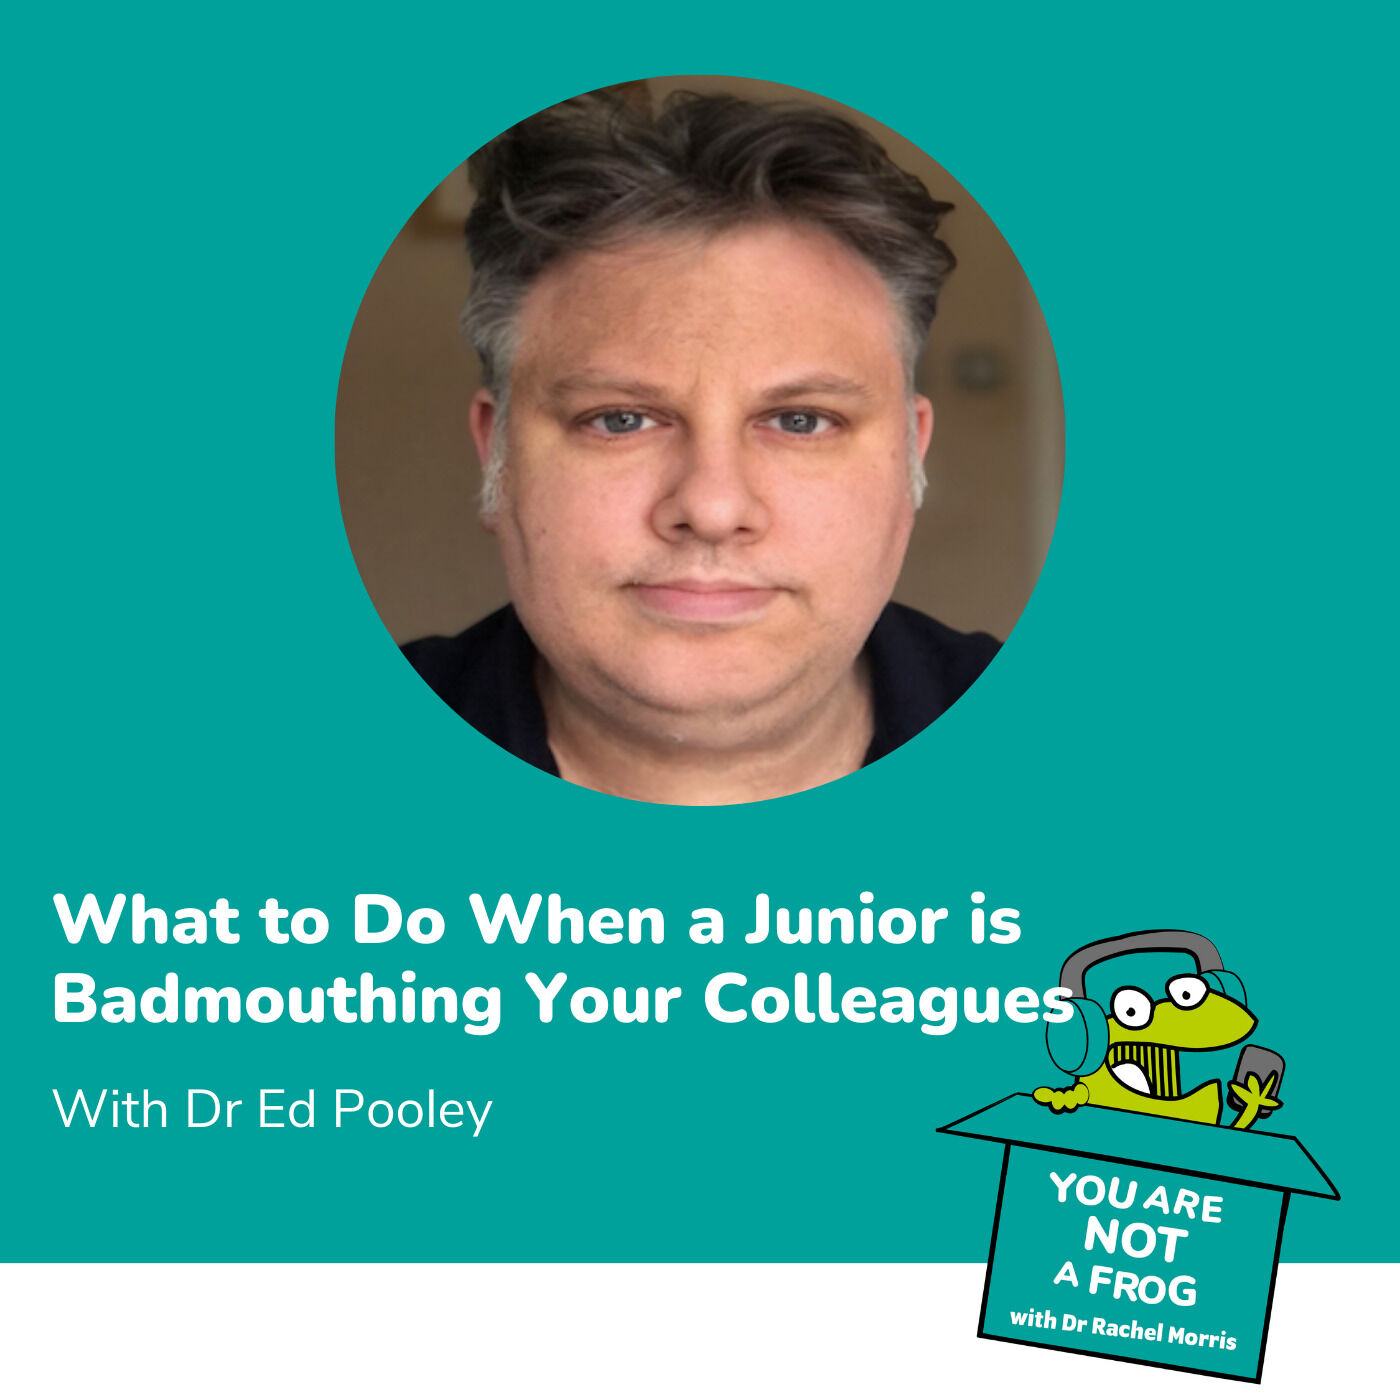 What to Do When a Junior is Badmouthing Your Colleagues